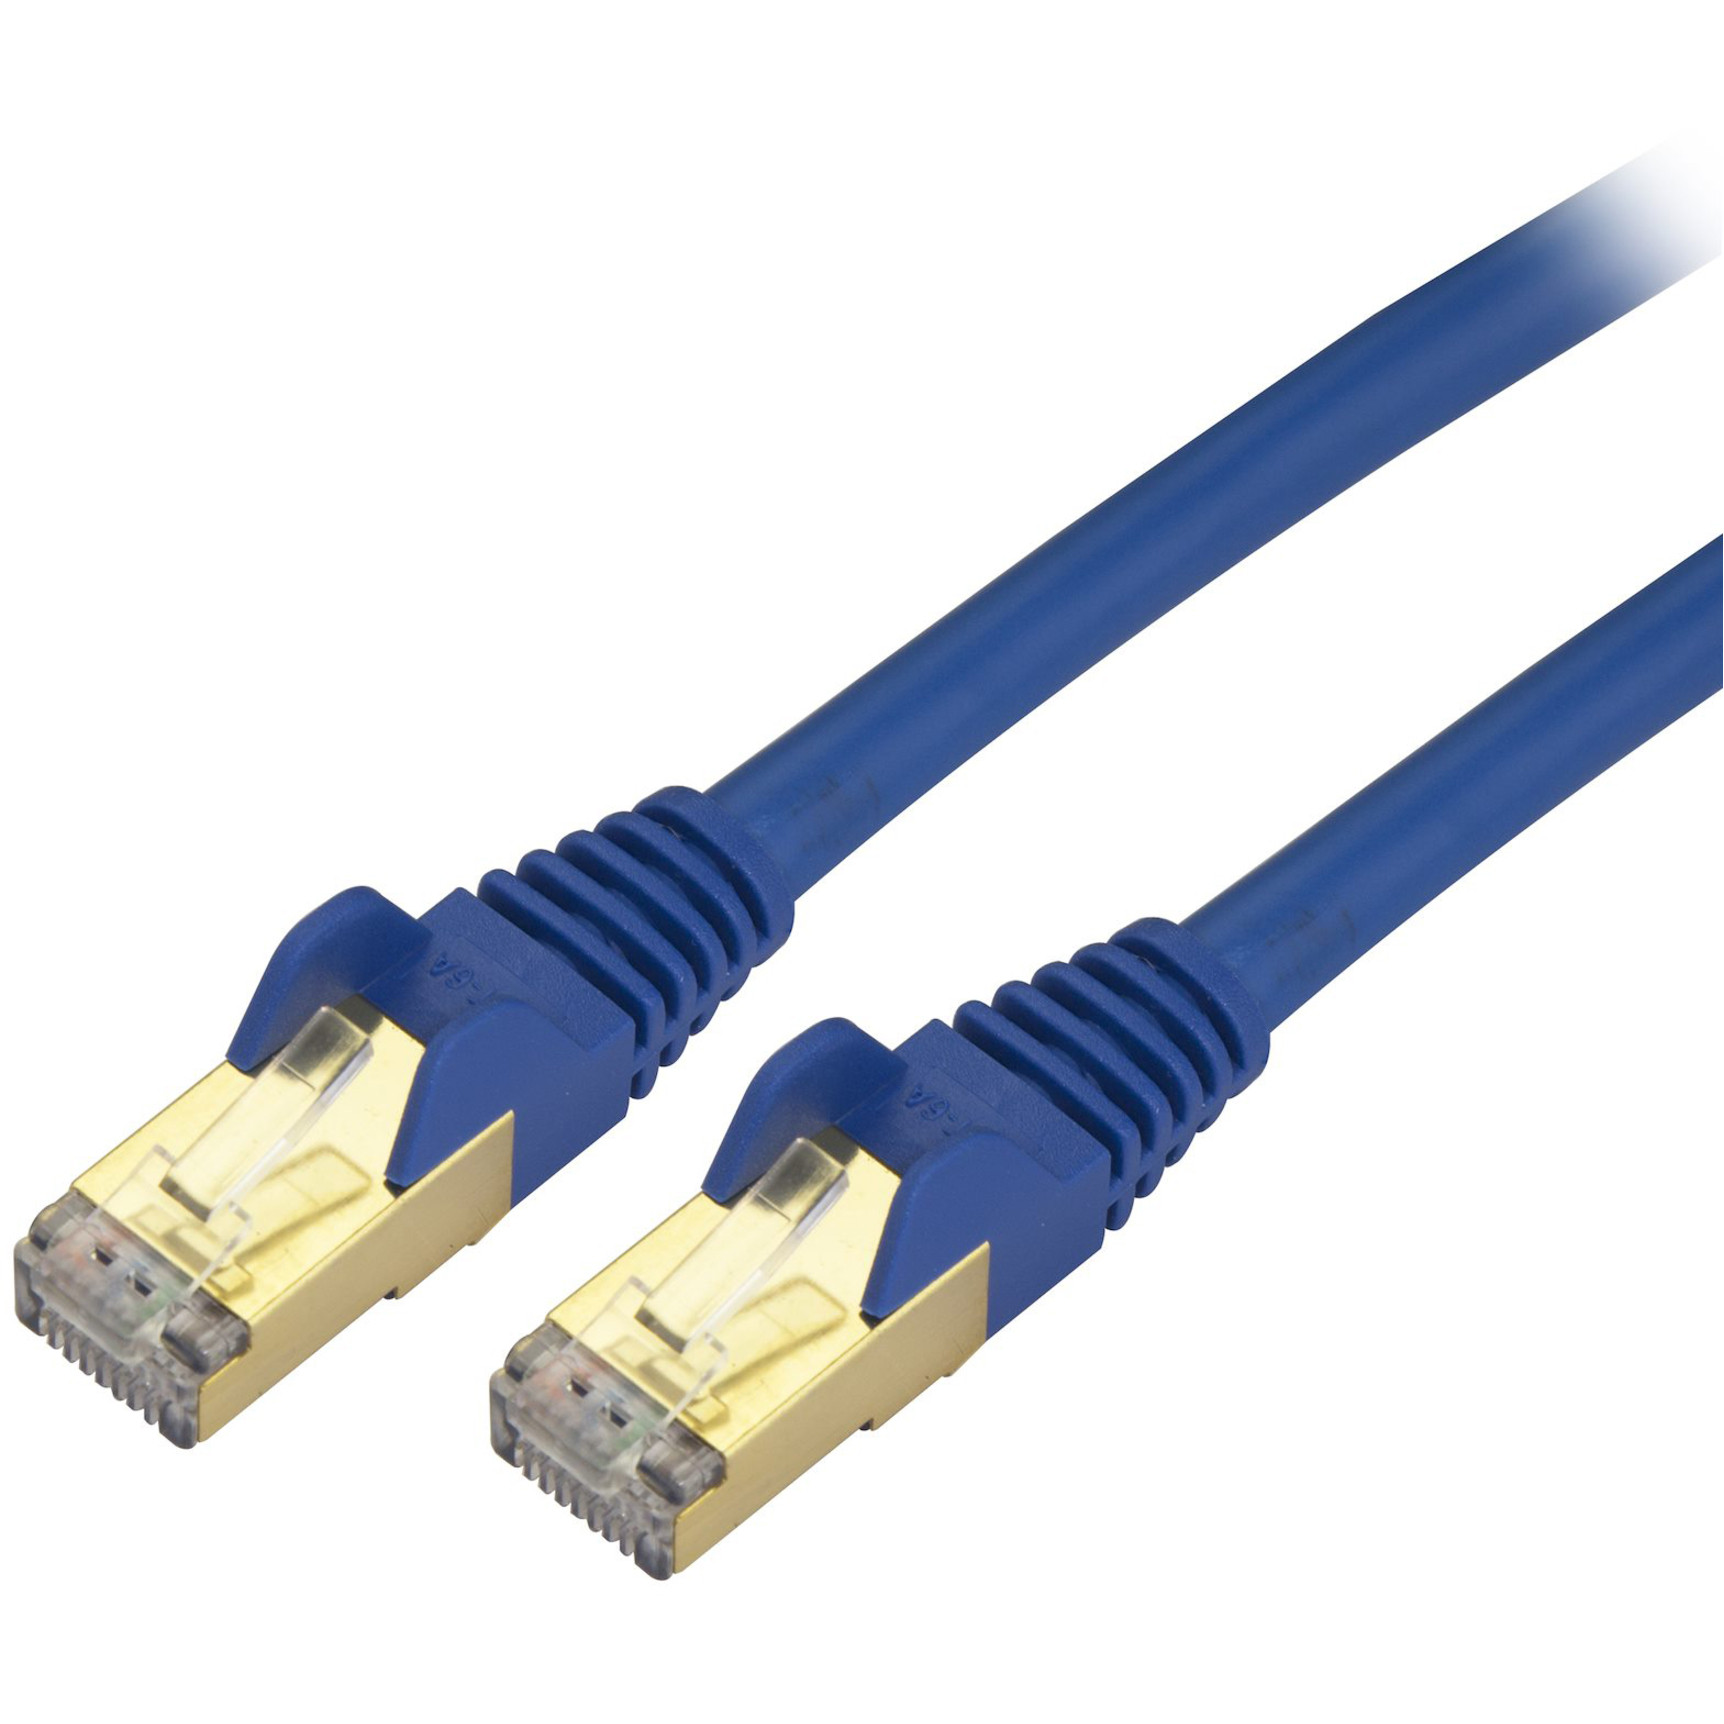 Startech .com 35ft CAT6a Ethernet Cable10 Gigabit Category 6a Shielded Snagless 100W PoE Patch Cord10GbE Blue UL Certified Wiring/TIA -… C6ASPAT35BL